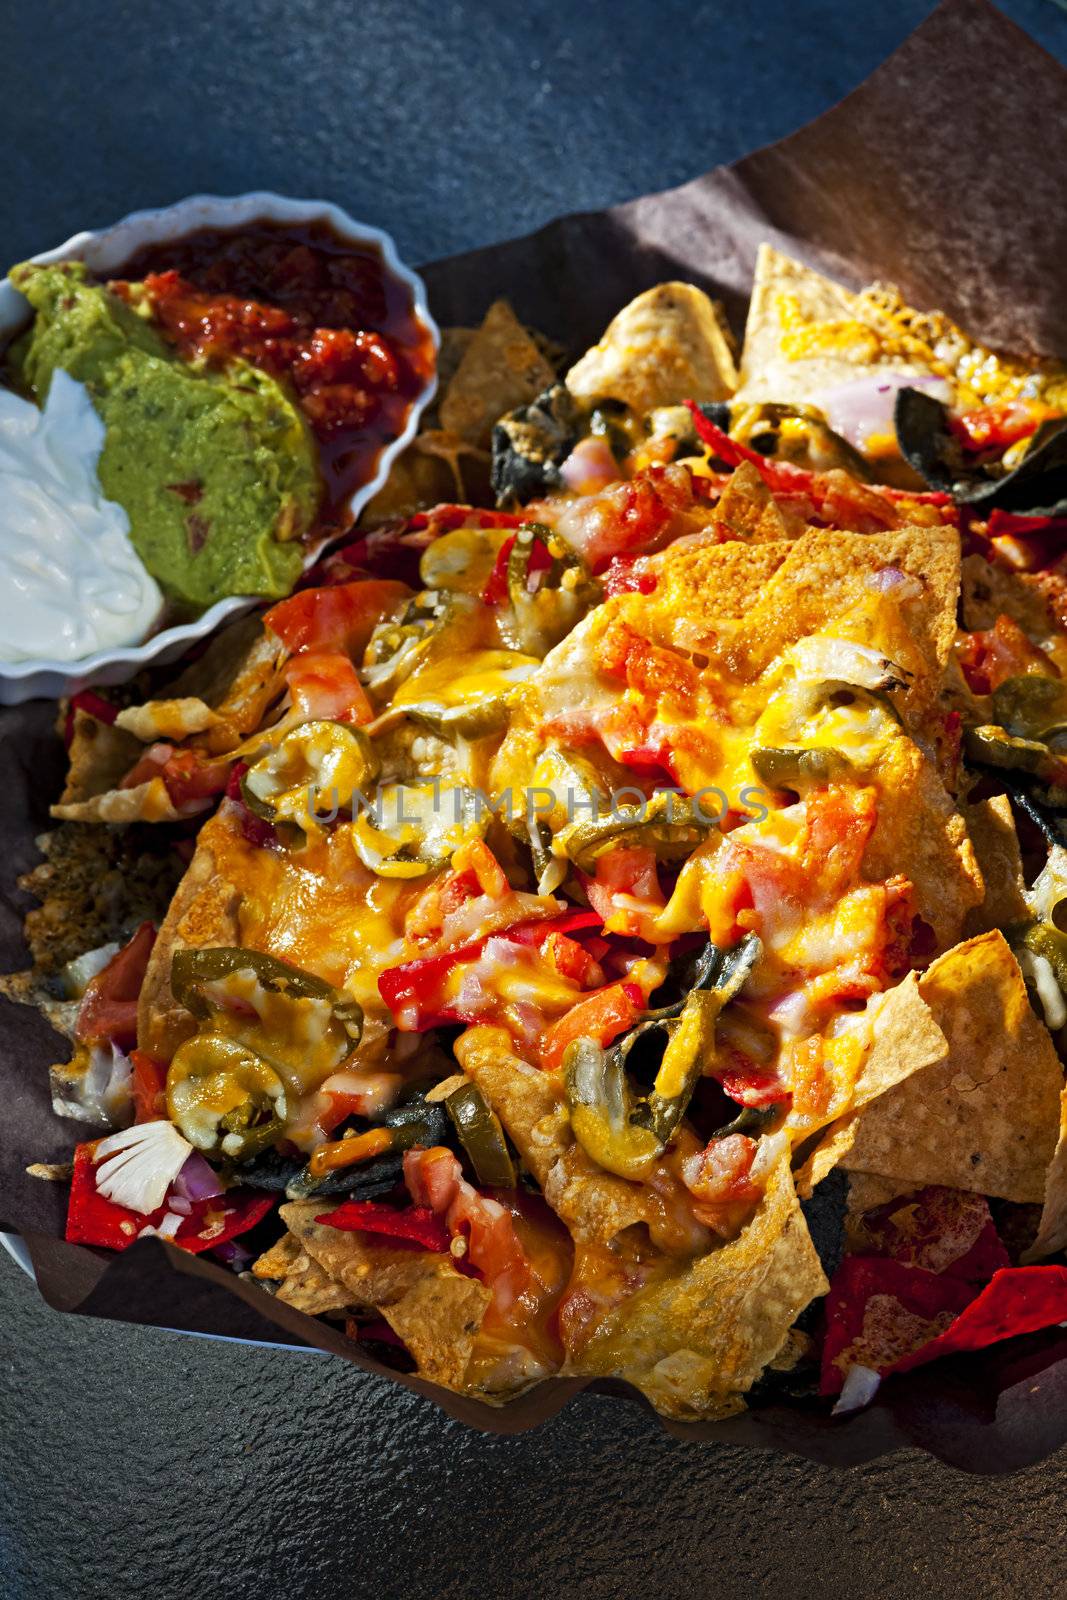 Nacho basket with cheese by elenathewise